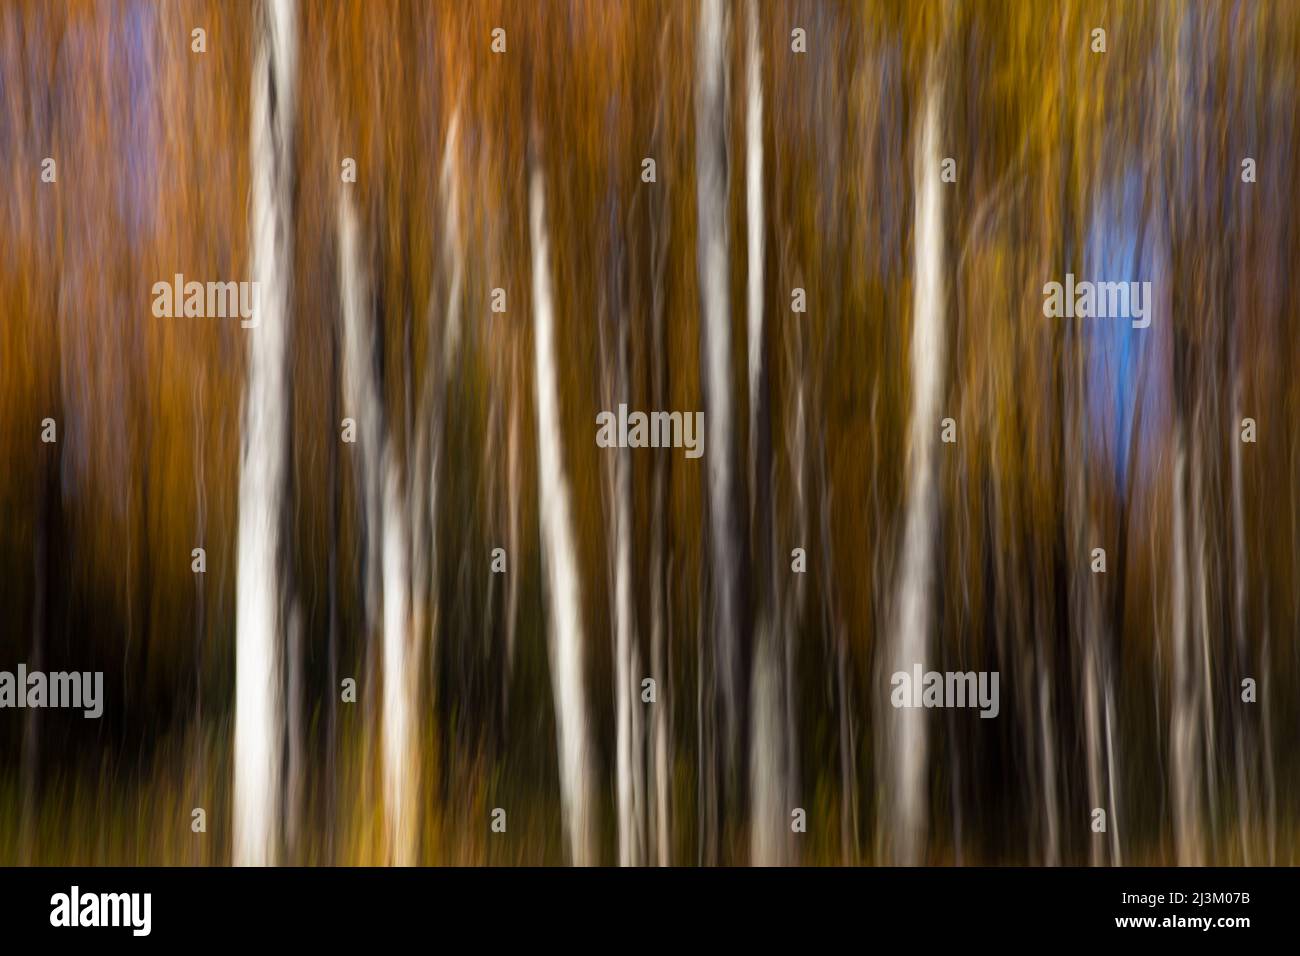 Aspen/birch trees with fall colors displayed on a long exposure create an artistic feeling or memory of fall; Alaska, United States of America Stock Photo